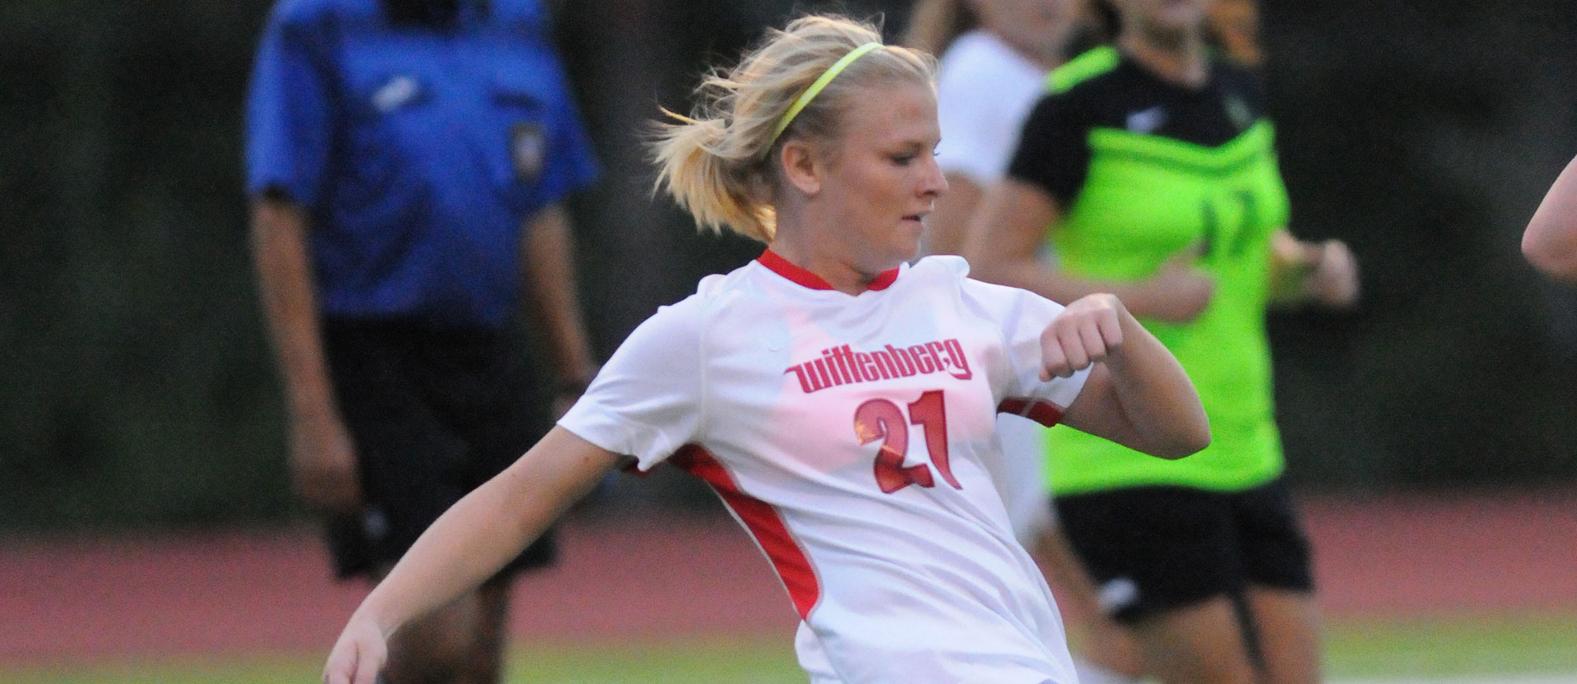 Emma Box recorded two of Wittenberg's shots in a 3-1 win over Manchester. File Photo | Nick Falzerano